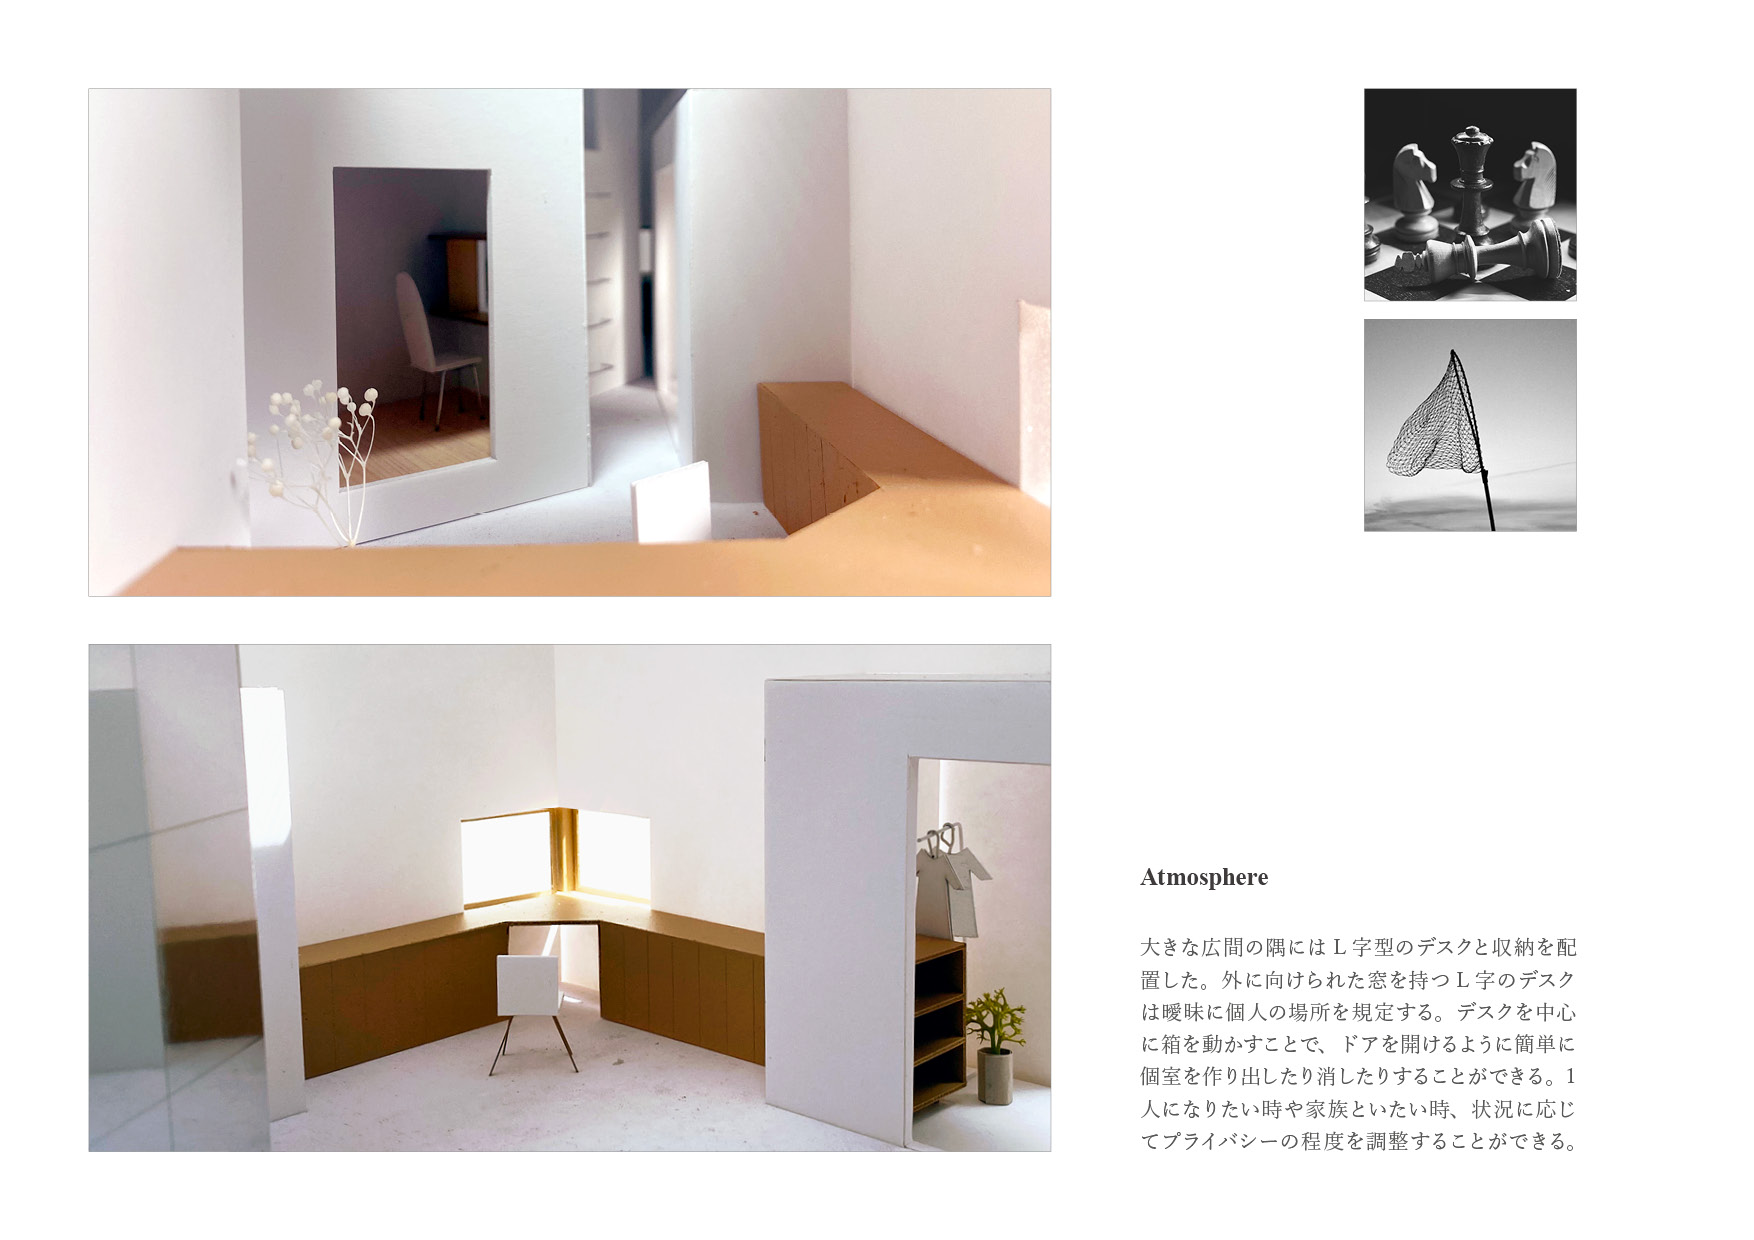 AFTERPOSTOFFICEのhouseforboxesという本の画像